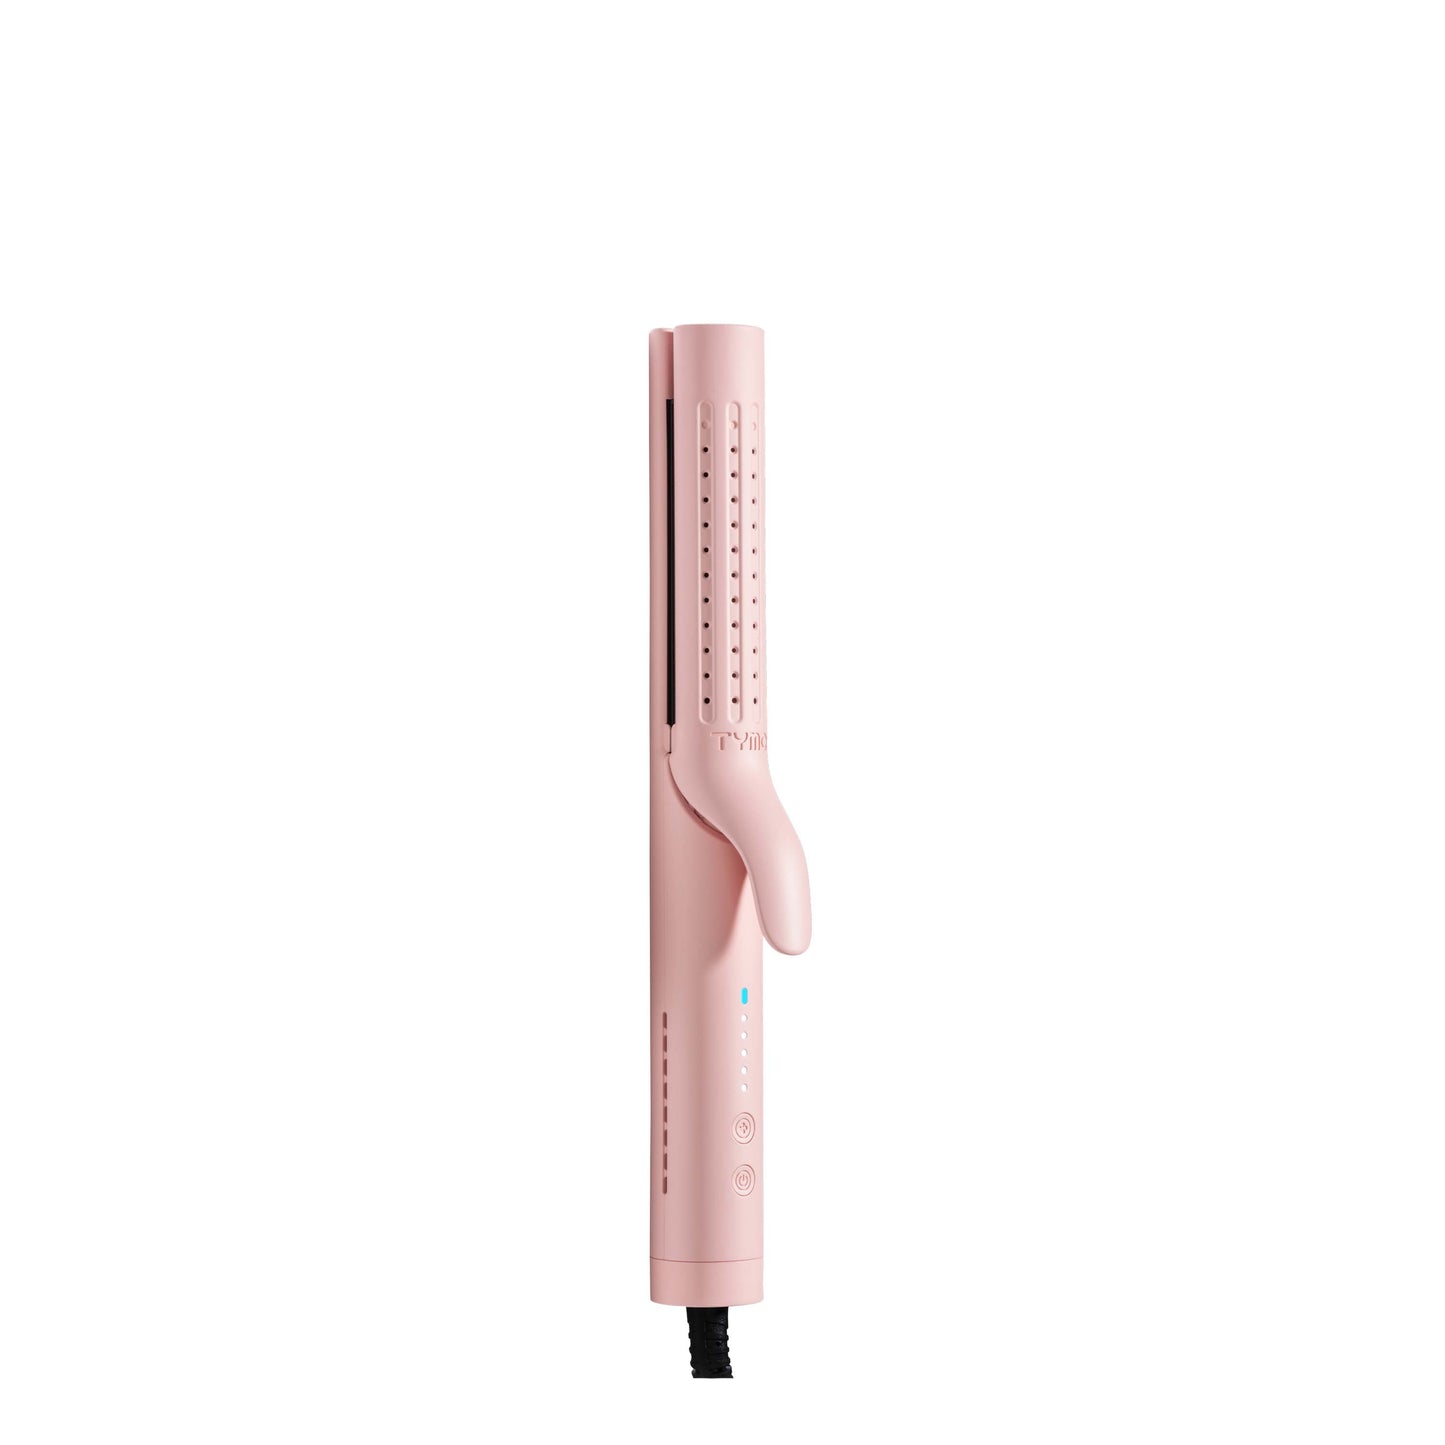 TYMO AIRFLOW PINK 2 in 1 Hair Straightener and Curler